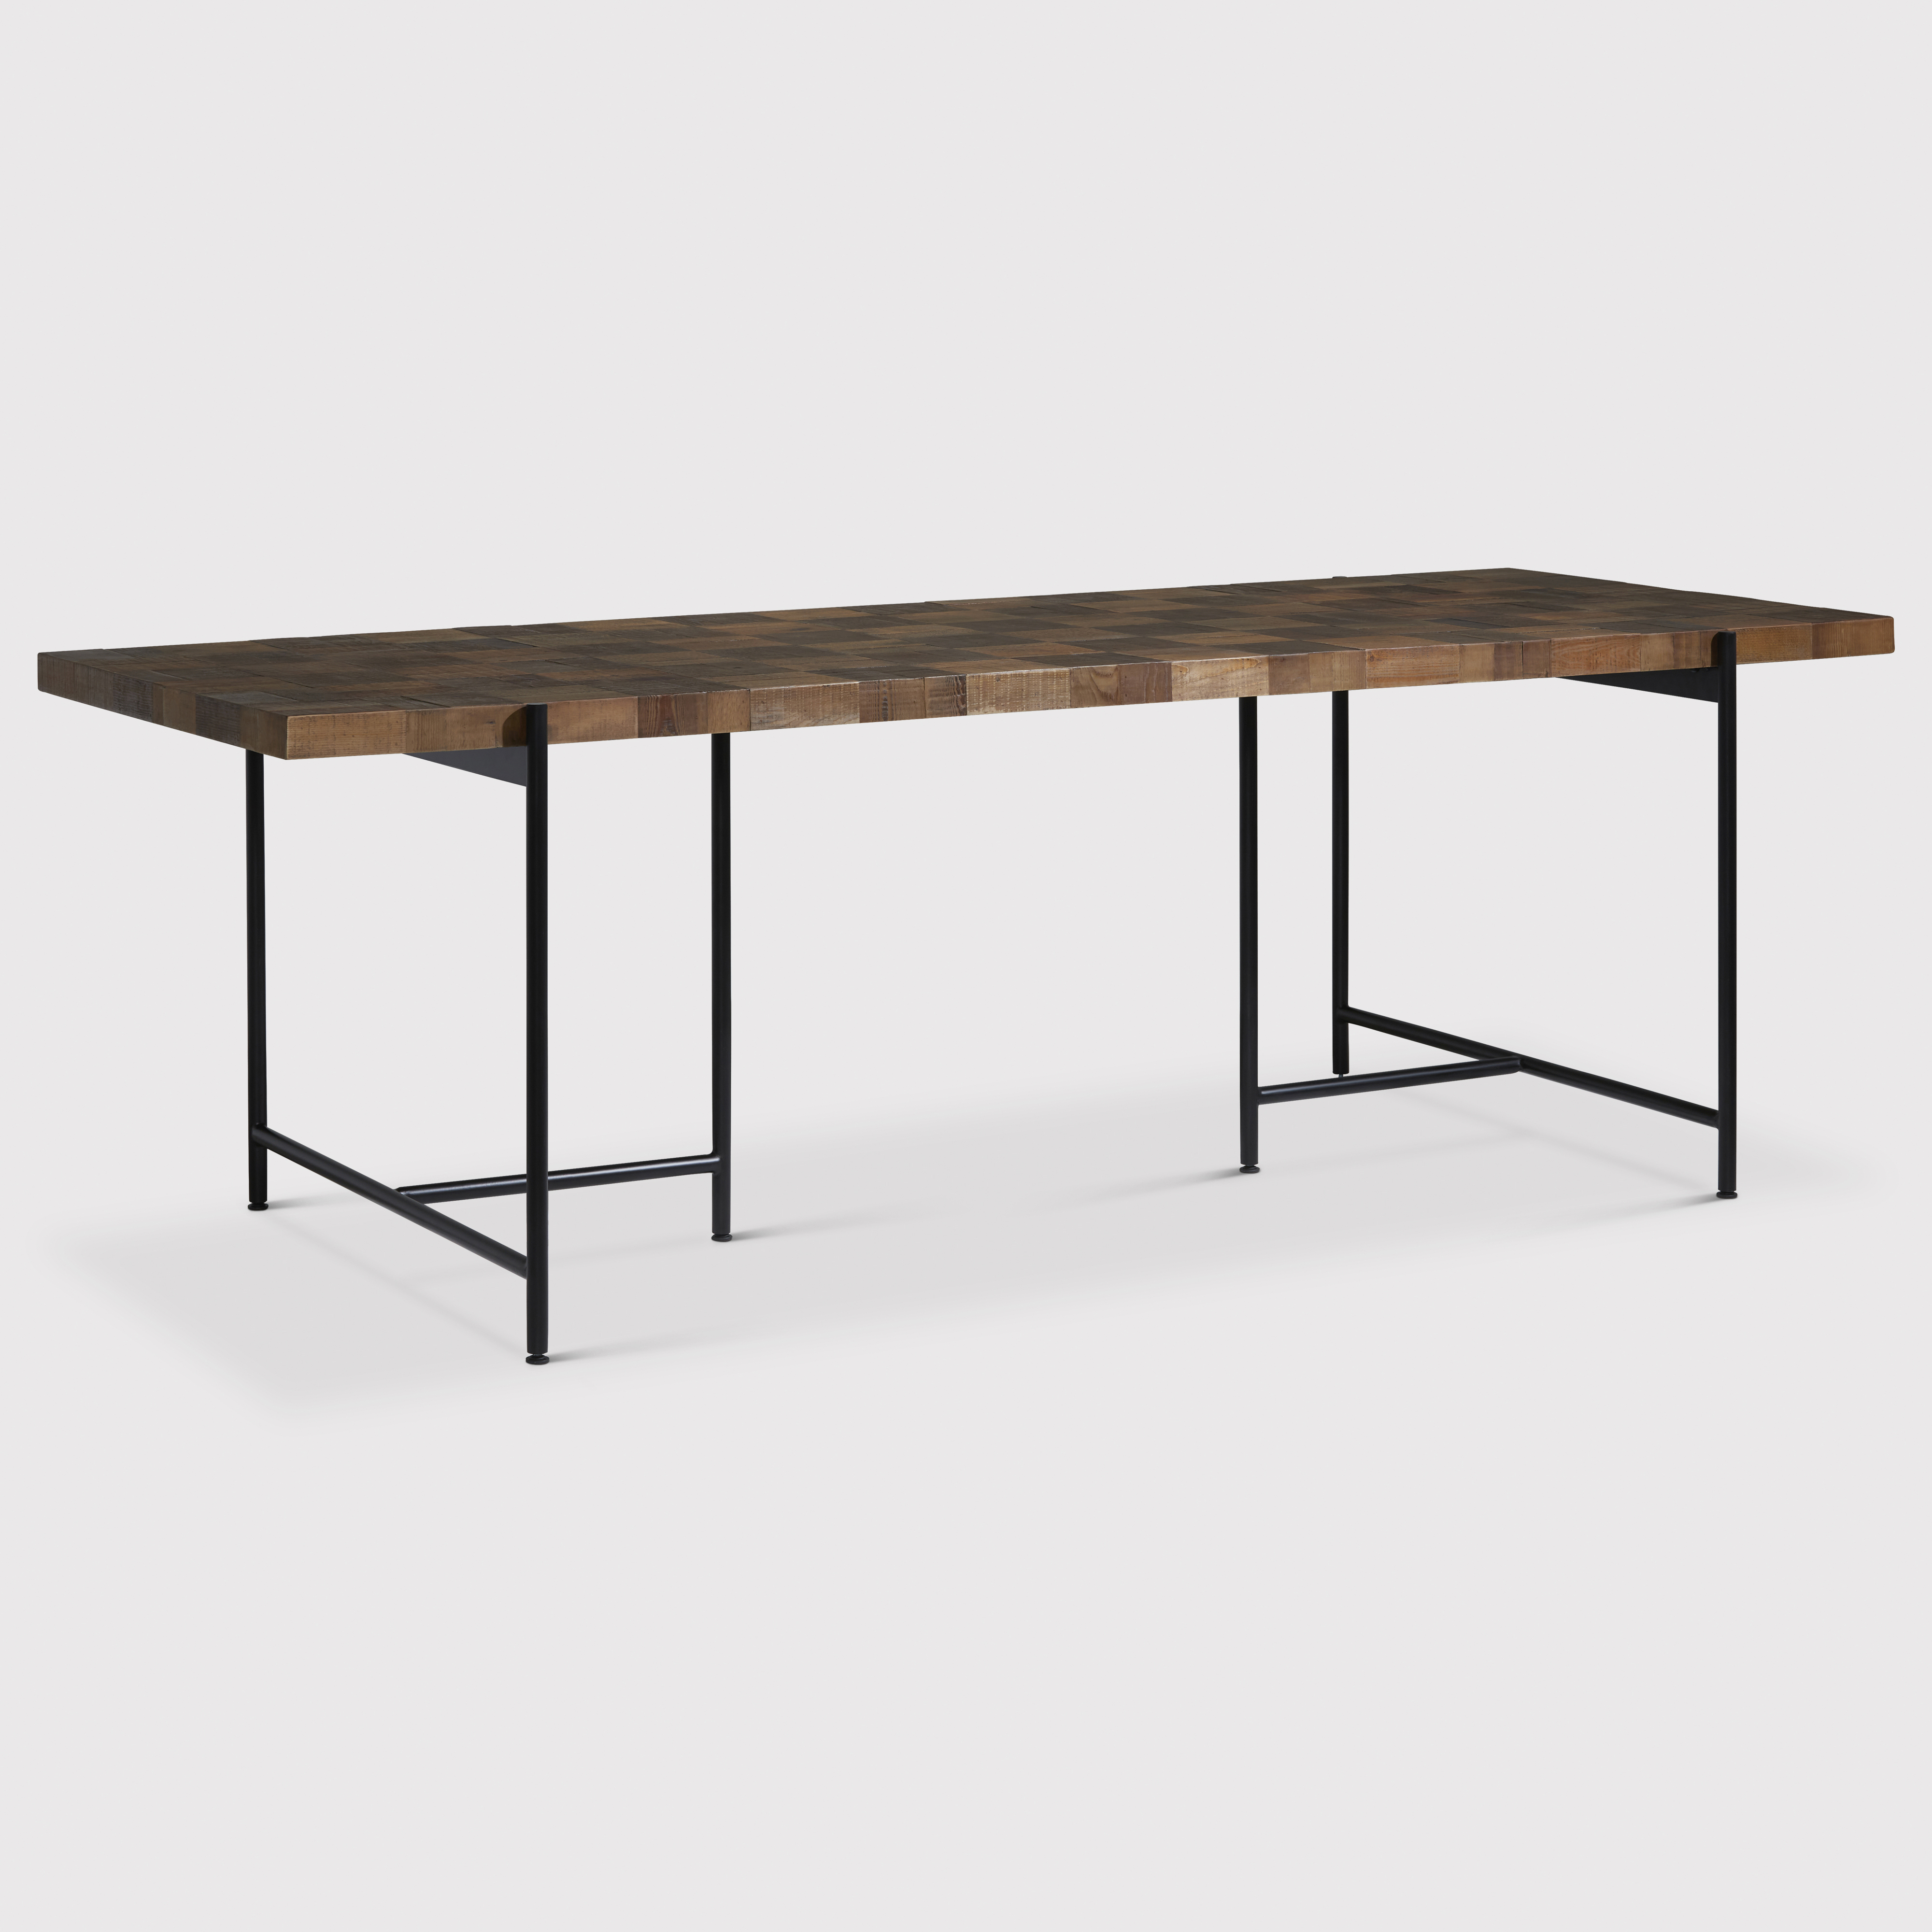 Bumi Dining Table 240cm, Brown | Barker & Stonehouse